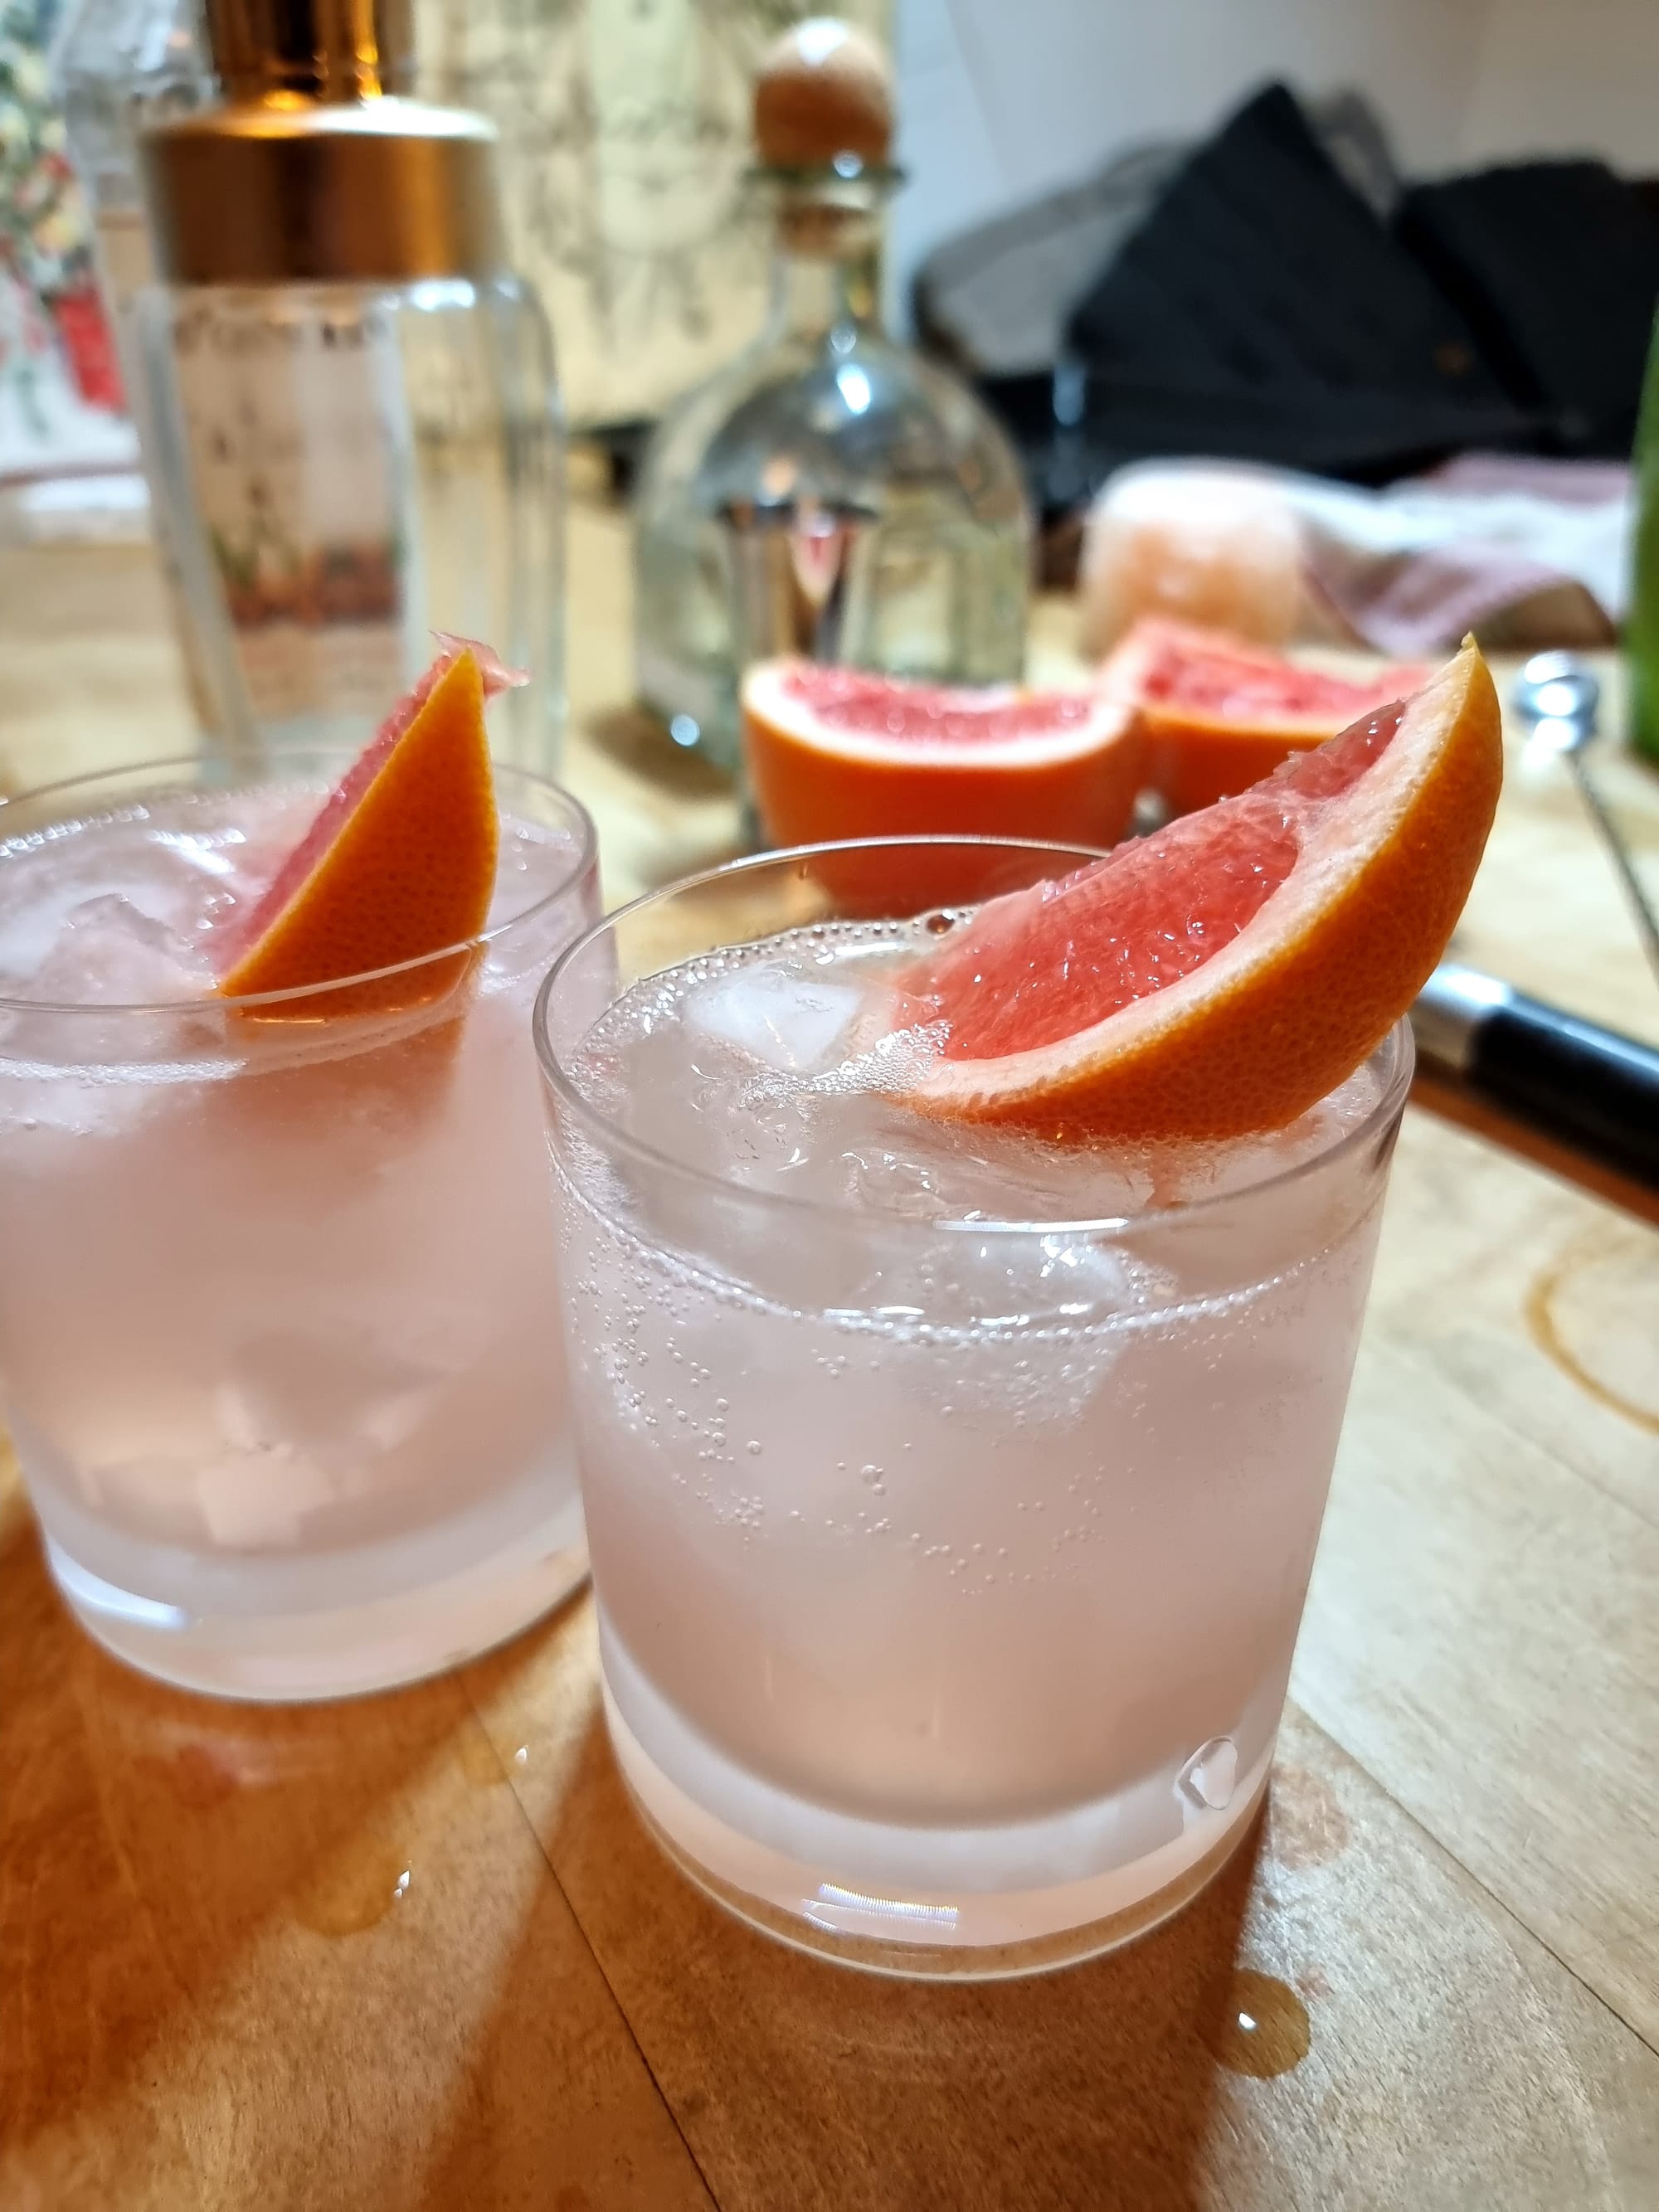 Two double old-fashioned glasses, filled with a pink, slightly sparkling liquid and some ice. Garnished with a slice of grapefruit. In the back, out of focus, a few bottles and cocktail paraphernalia.